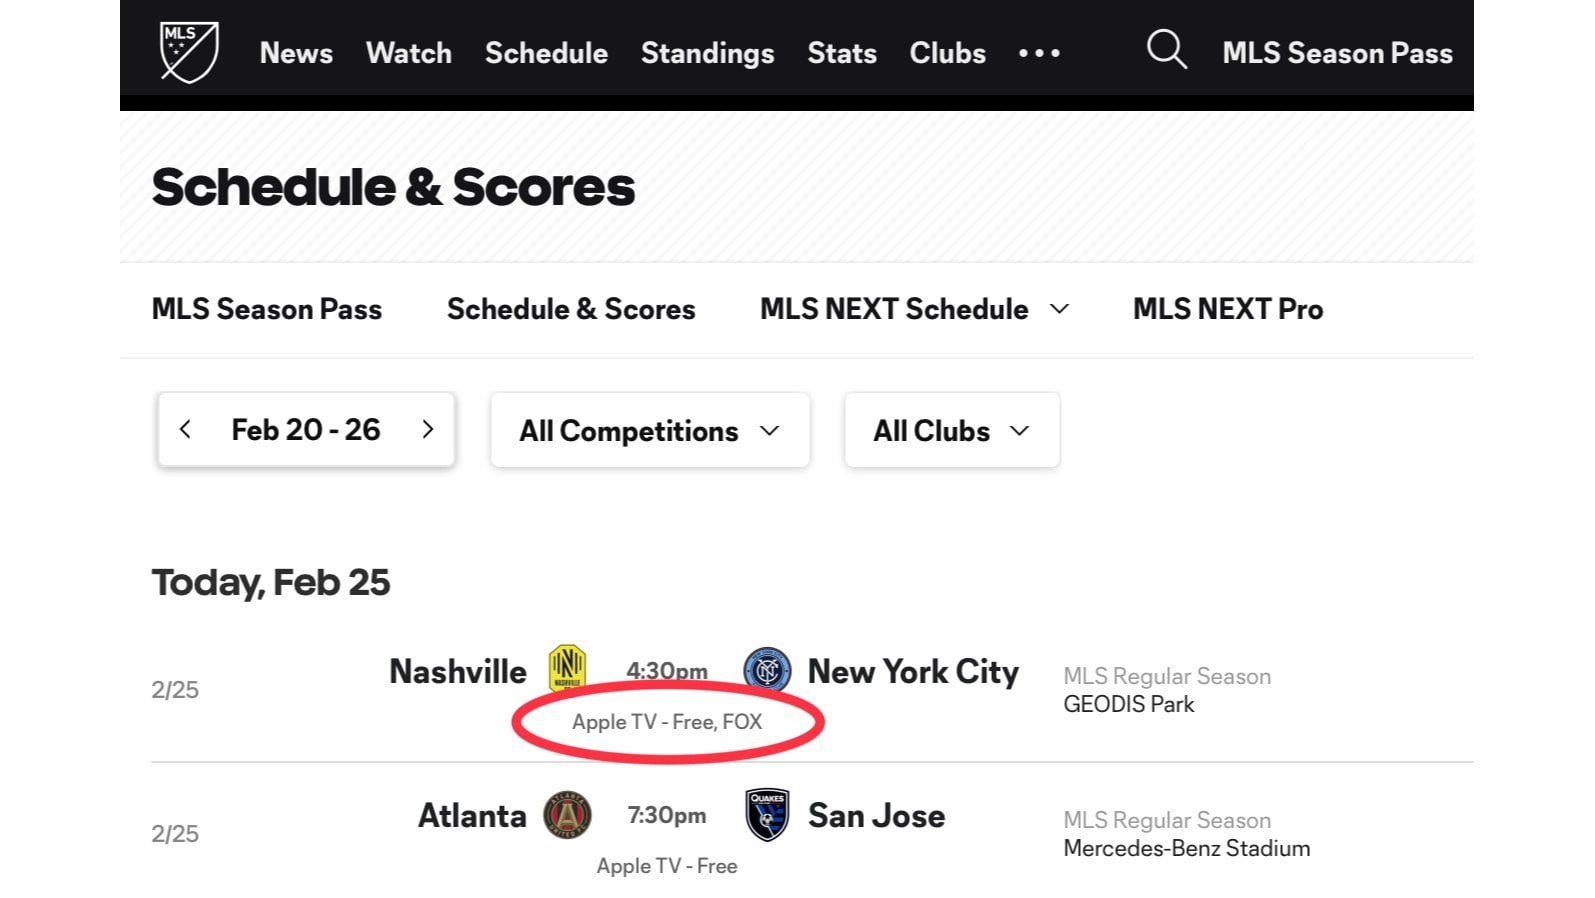 The first step in watching MLS matches for free is finding exactly which ones are available at no charge.